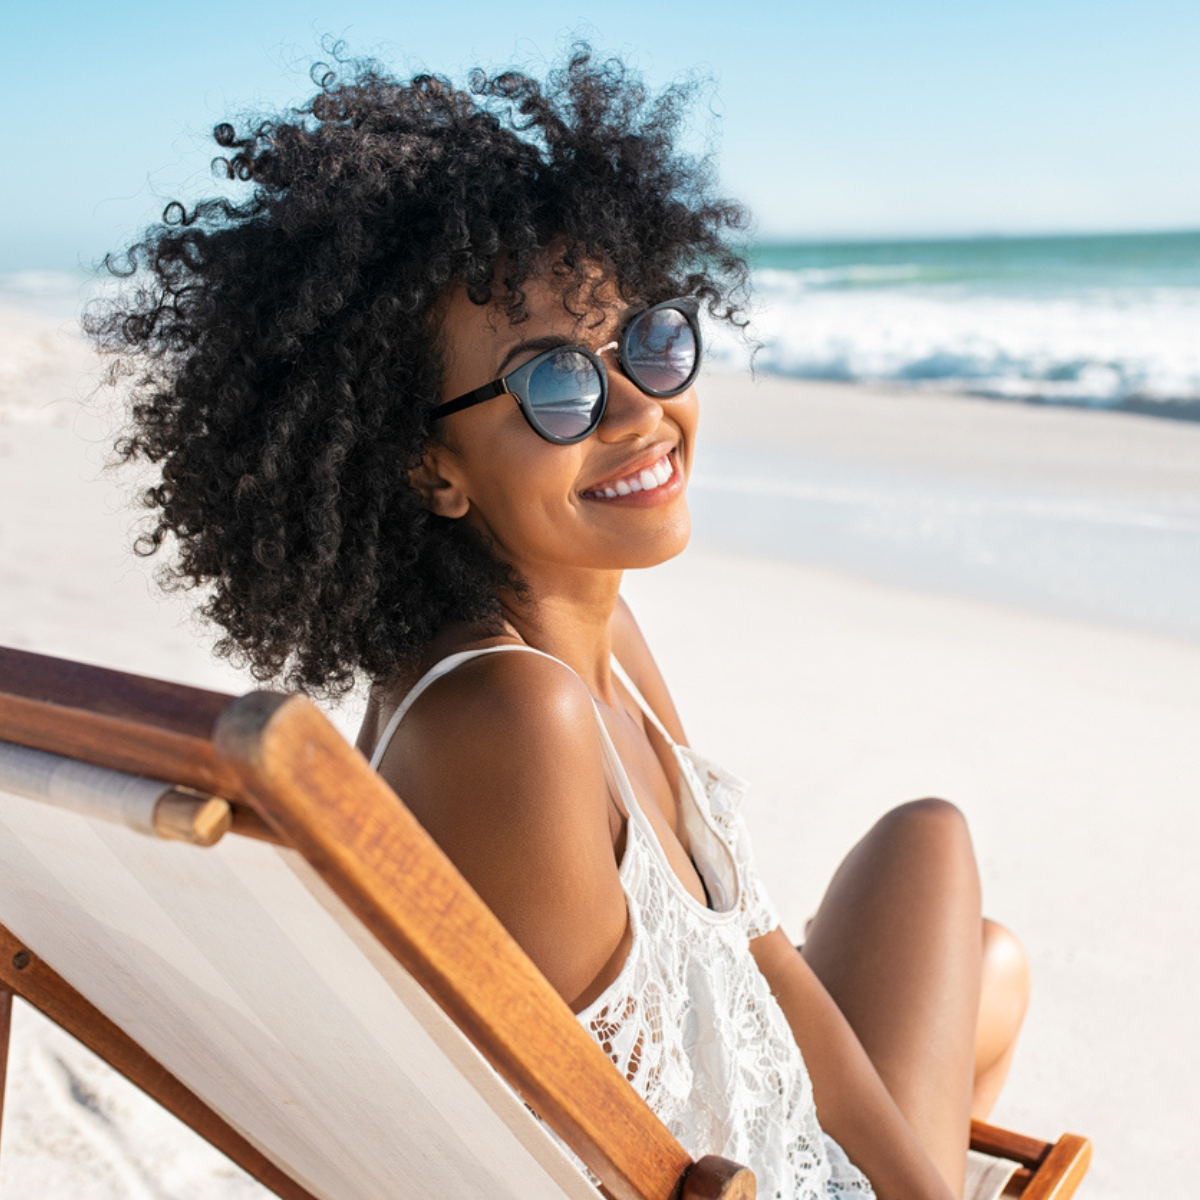 A black woman sitting on a lounge chair at the beach, smiling and enjoying the summer sun.